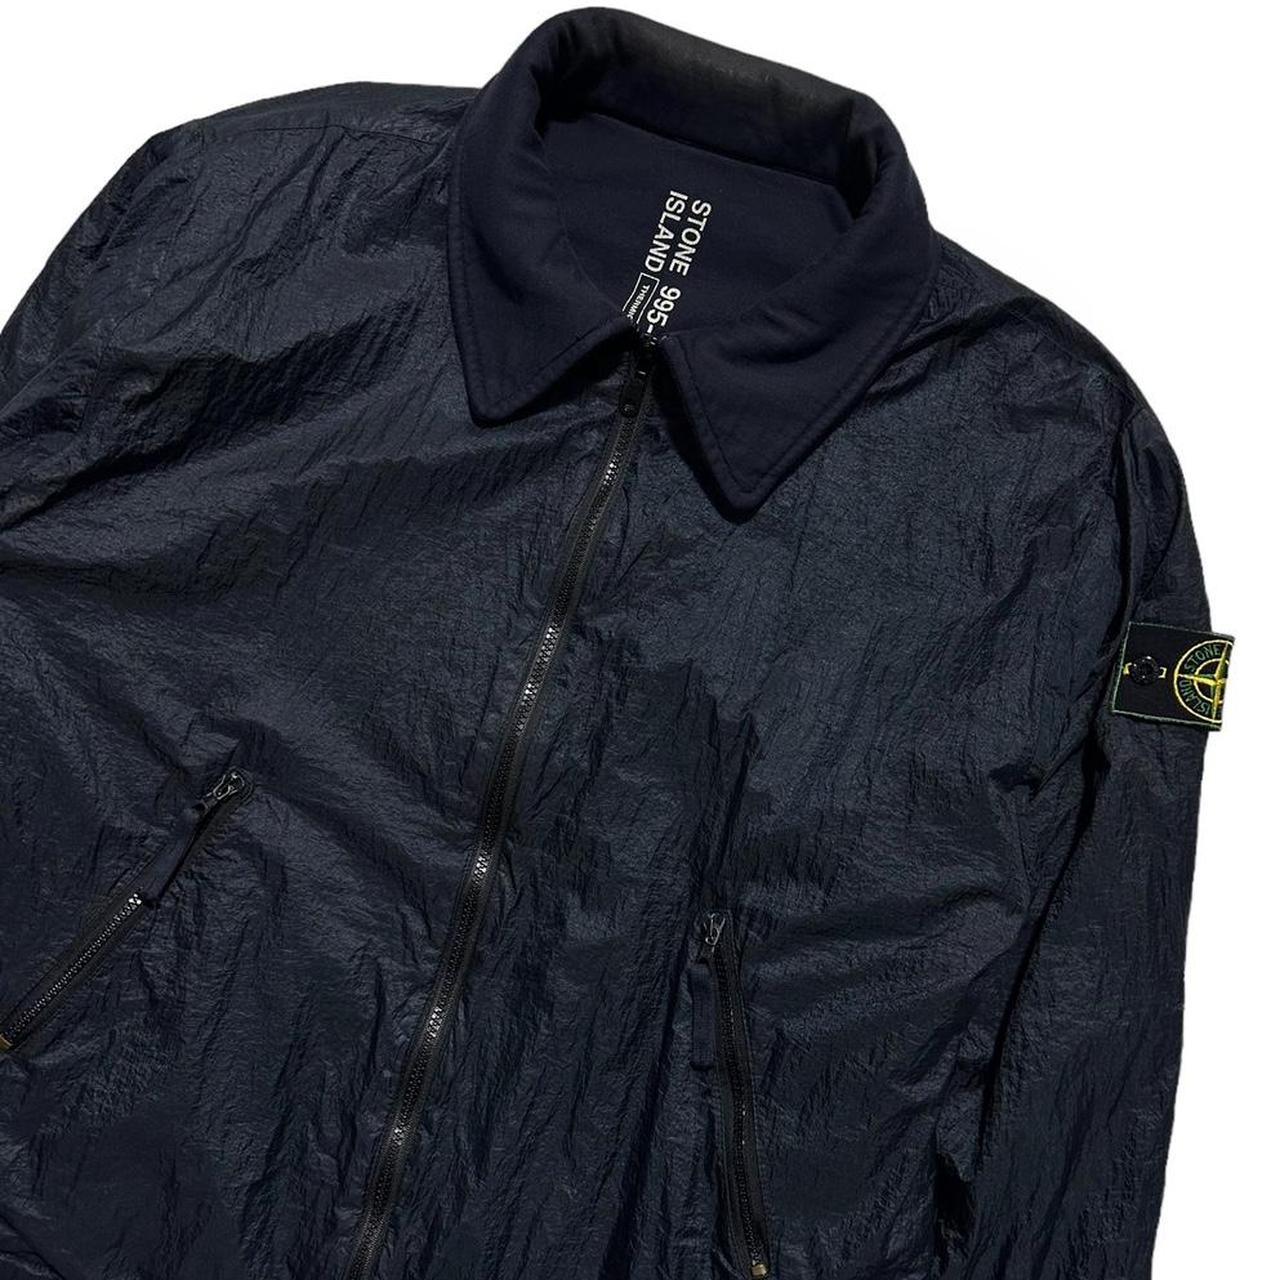 Stone Island 1995 Reversible Jacket - Known Source